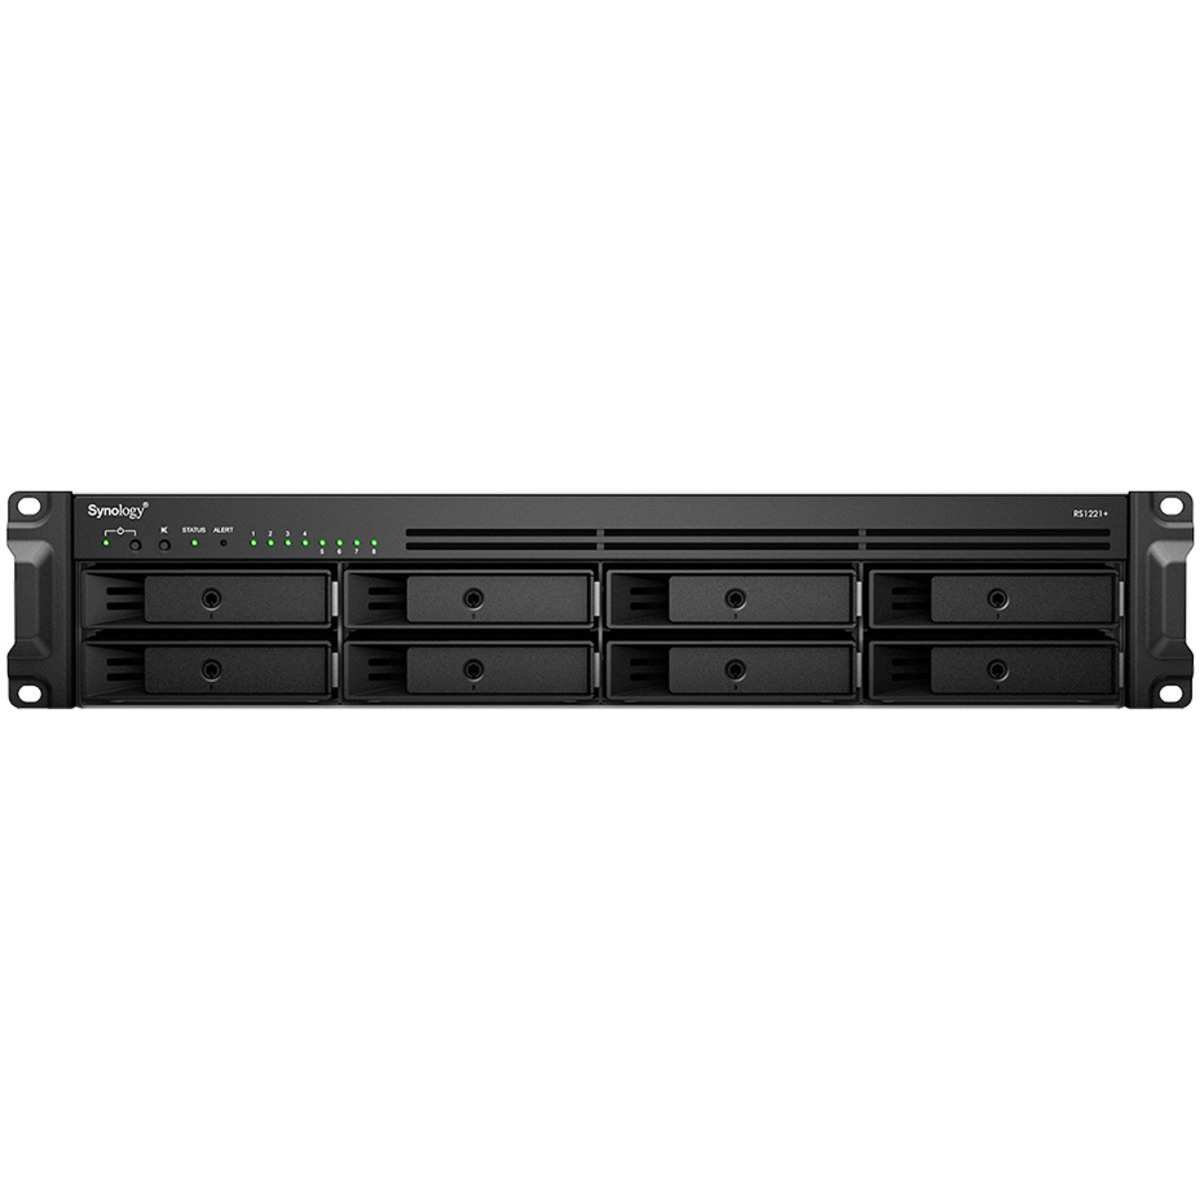 buy $4535 Synology RackStation RS1221+ 160tb RackMount NAS - Network Attached Storage Device 8x20000gb Seagate EXOS X20 ST20000NM007D 3.5 7200rpm SATA 6Gb/s HDD ENTERPRISE Class Drives Installed - Burn-In Tested - nas headquarters buy network attached storage server device das new raid-5 free shipping usa RackStation RS1221+